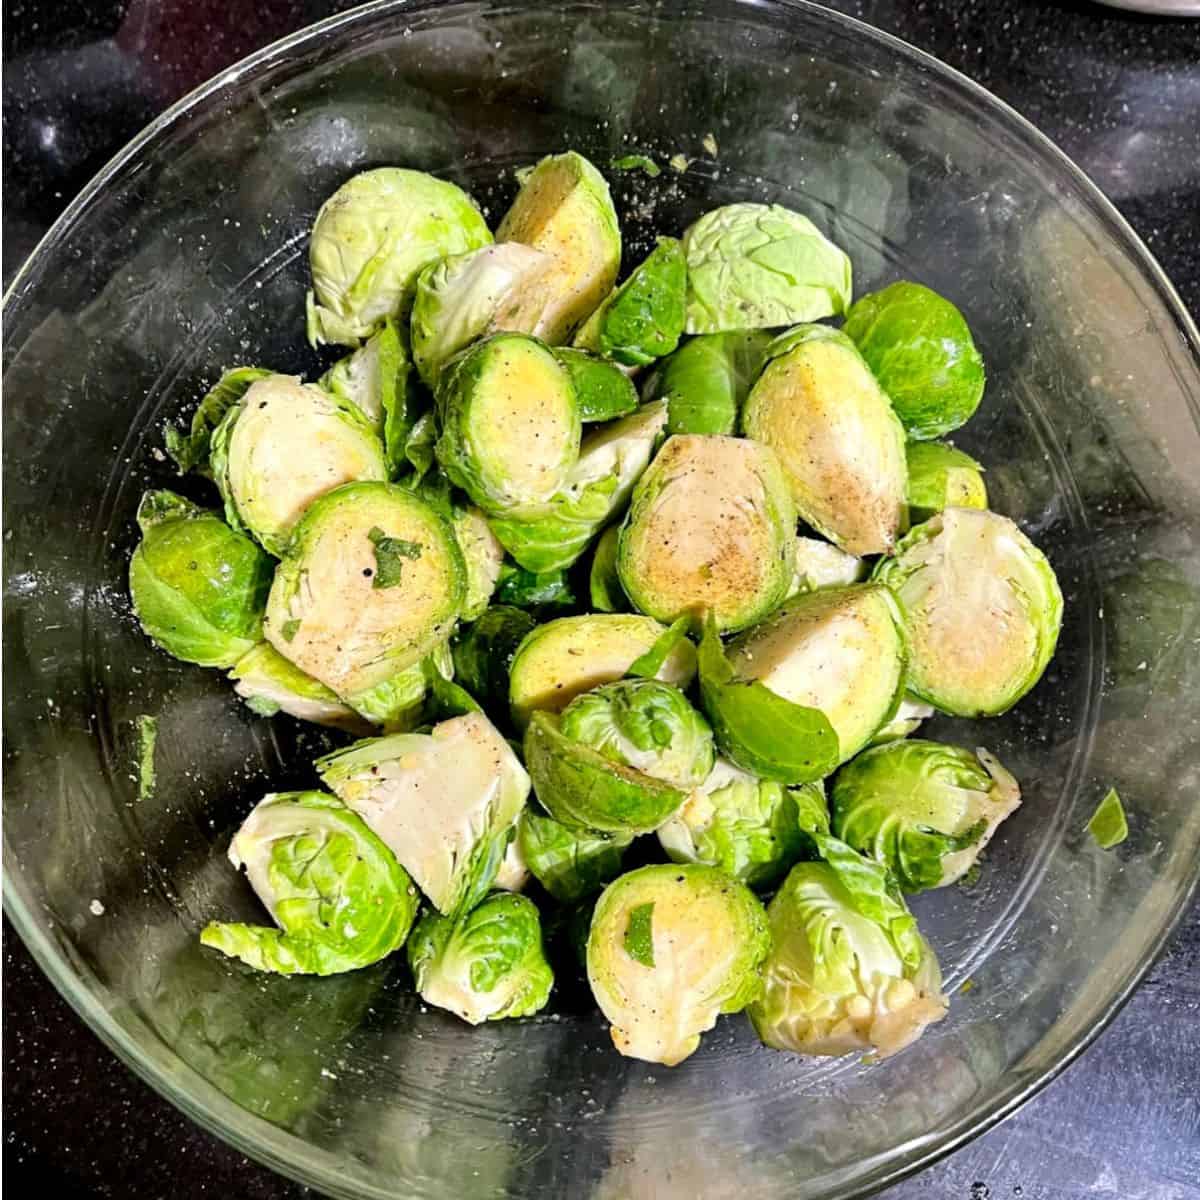 Seasoned Brussels sprouts in bowl.